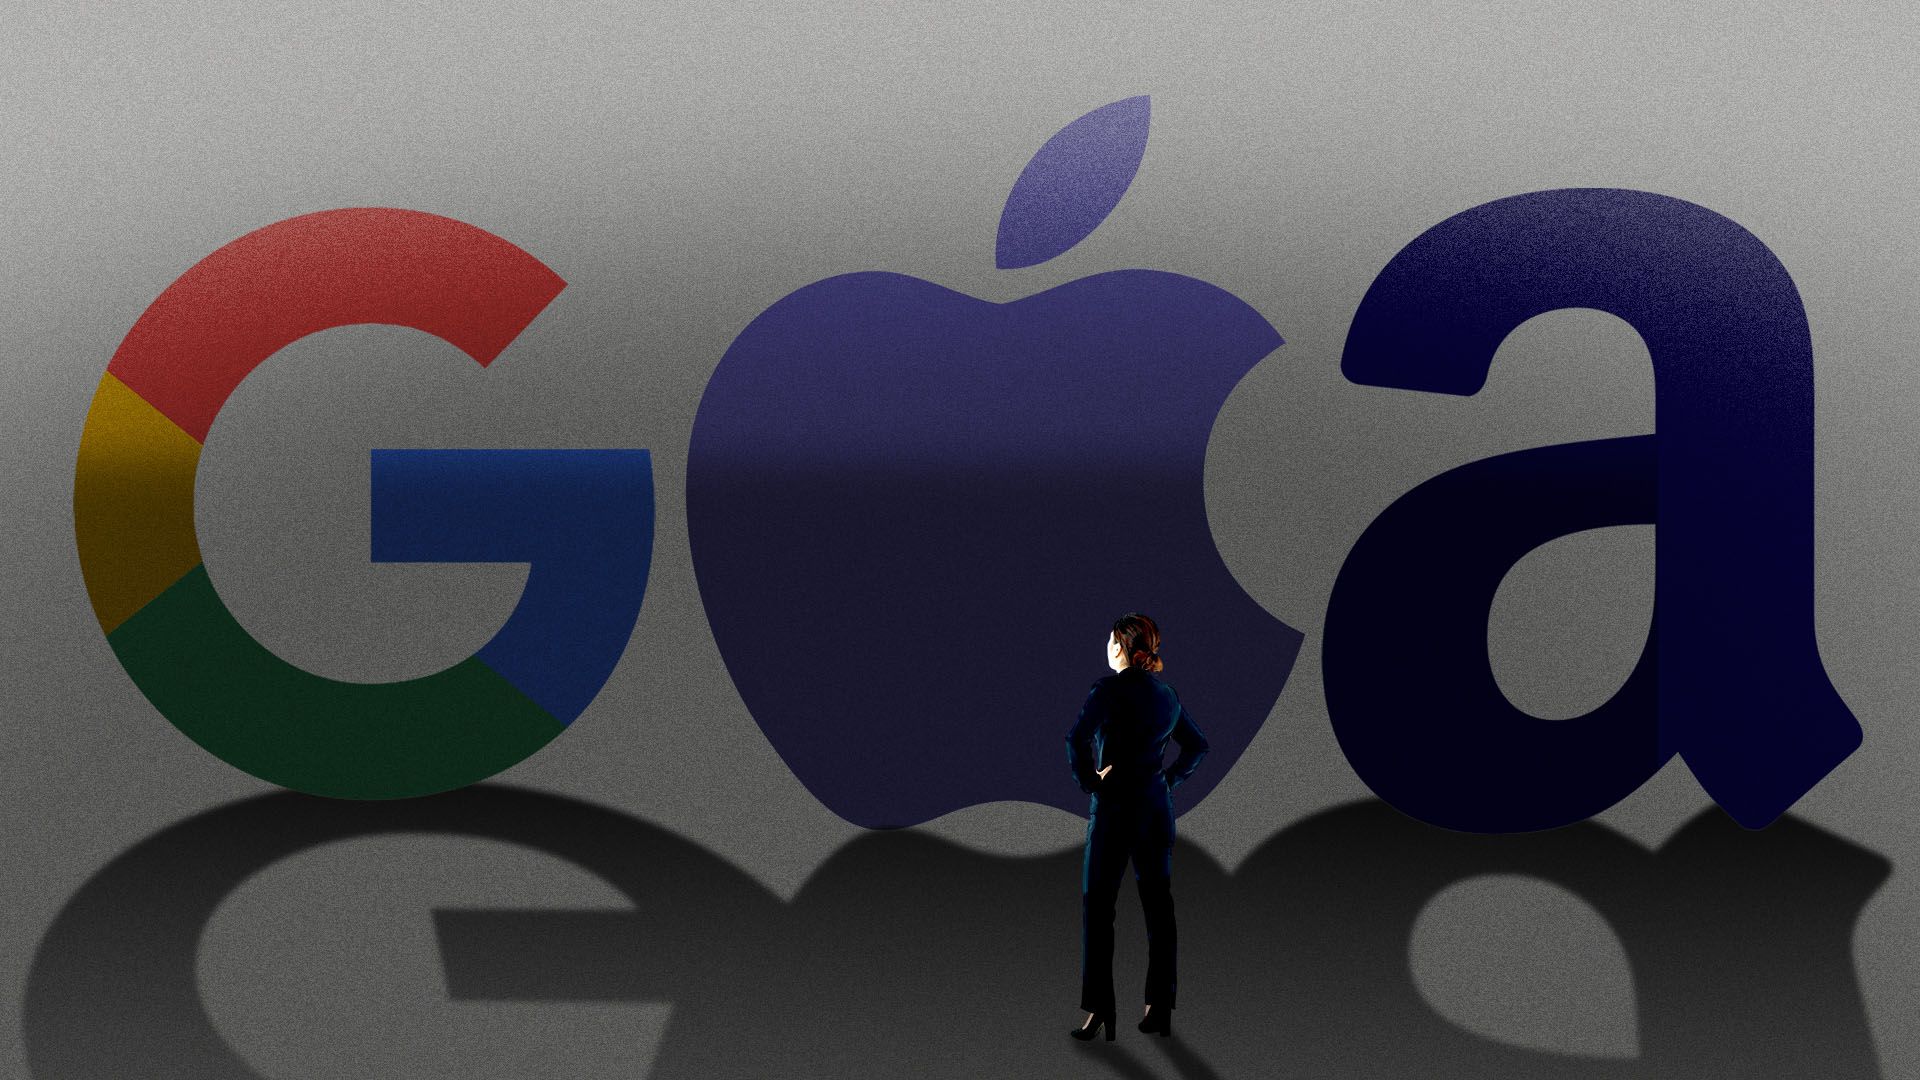 llustration of the Google, Apple and Amazon logos casting long shadows on a small woman in tech in the foreground